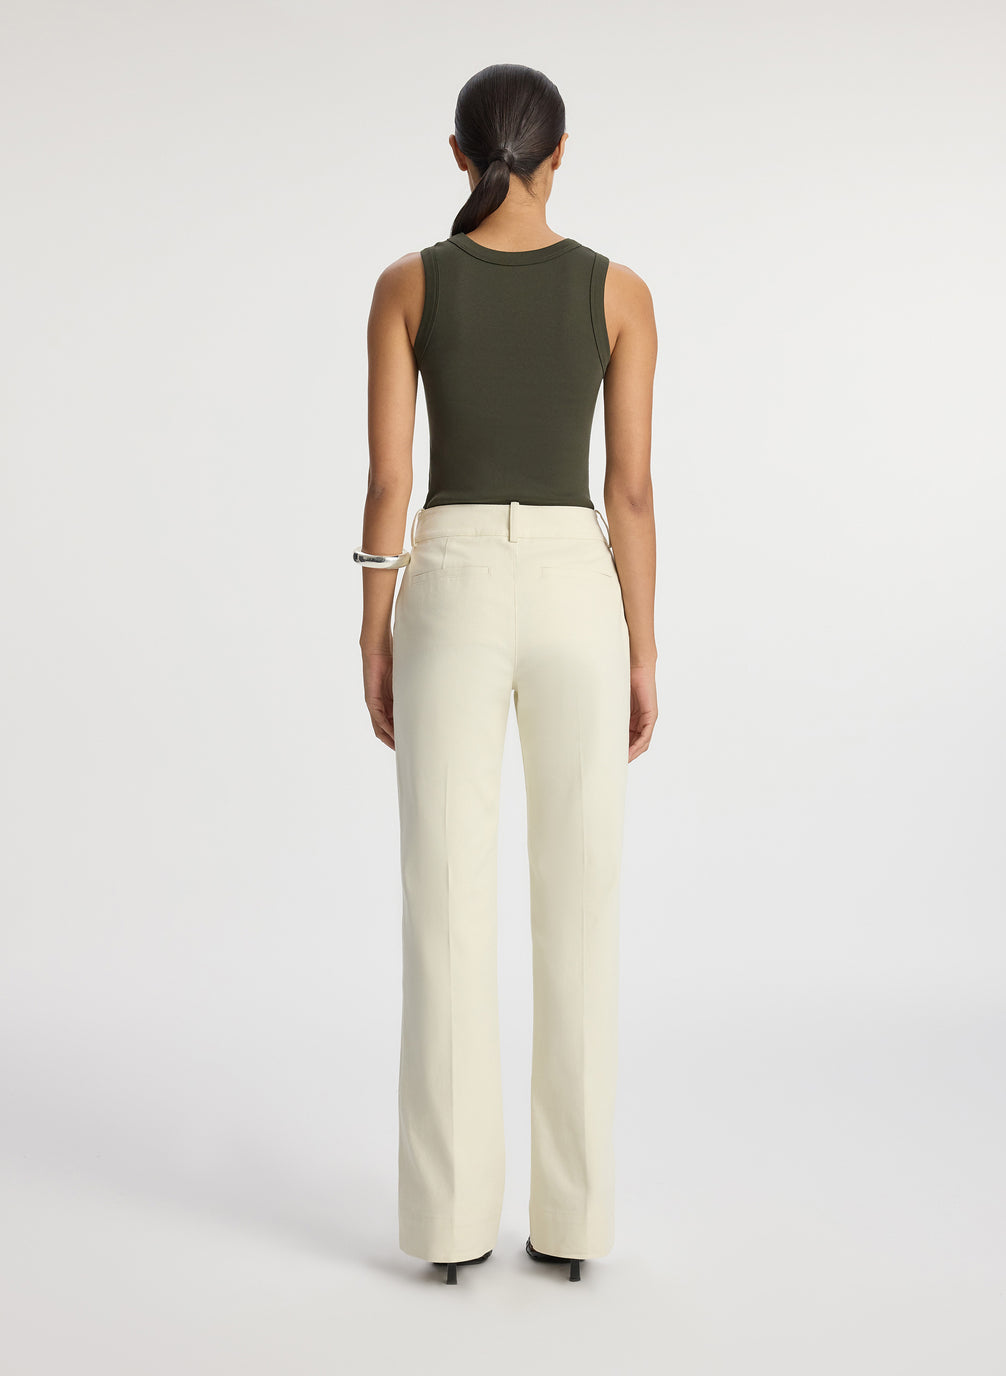 back view of woman wearing olive green sleeveless top with cream wide leg pants